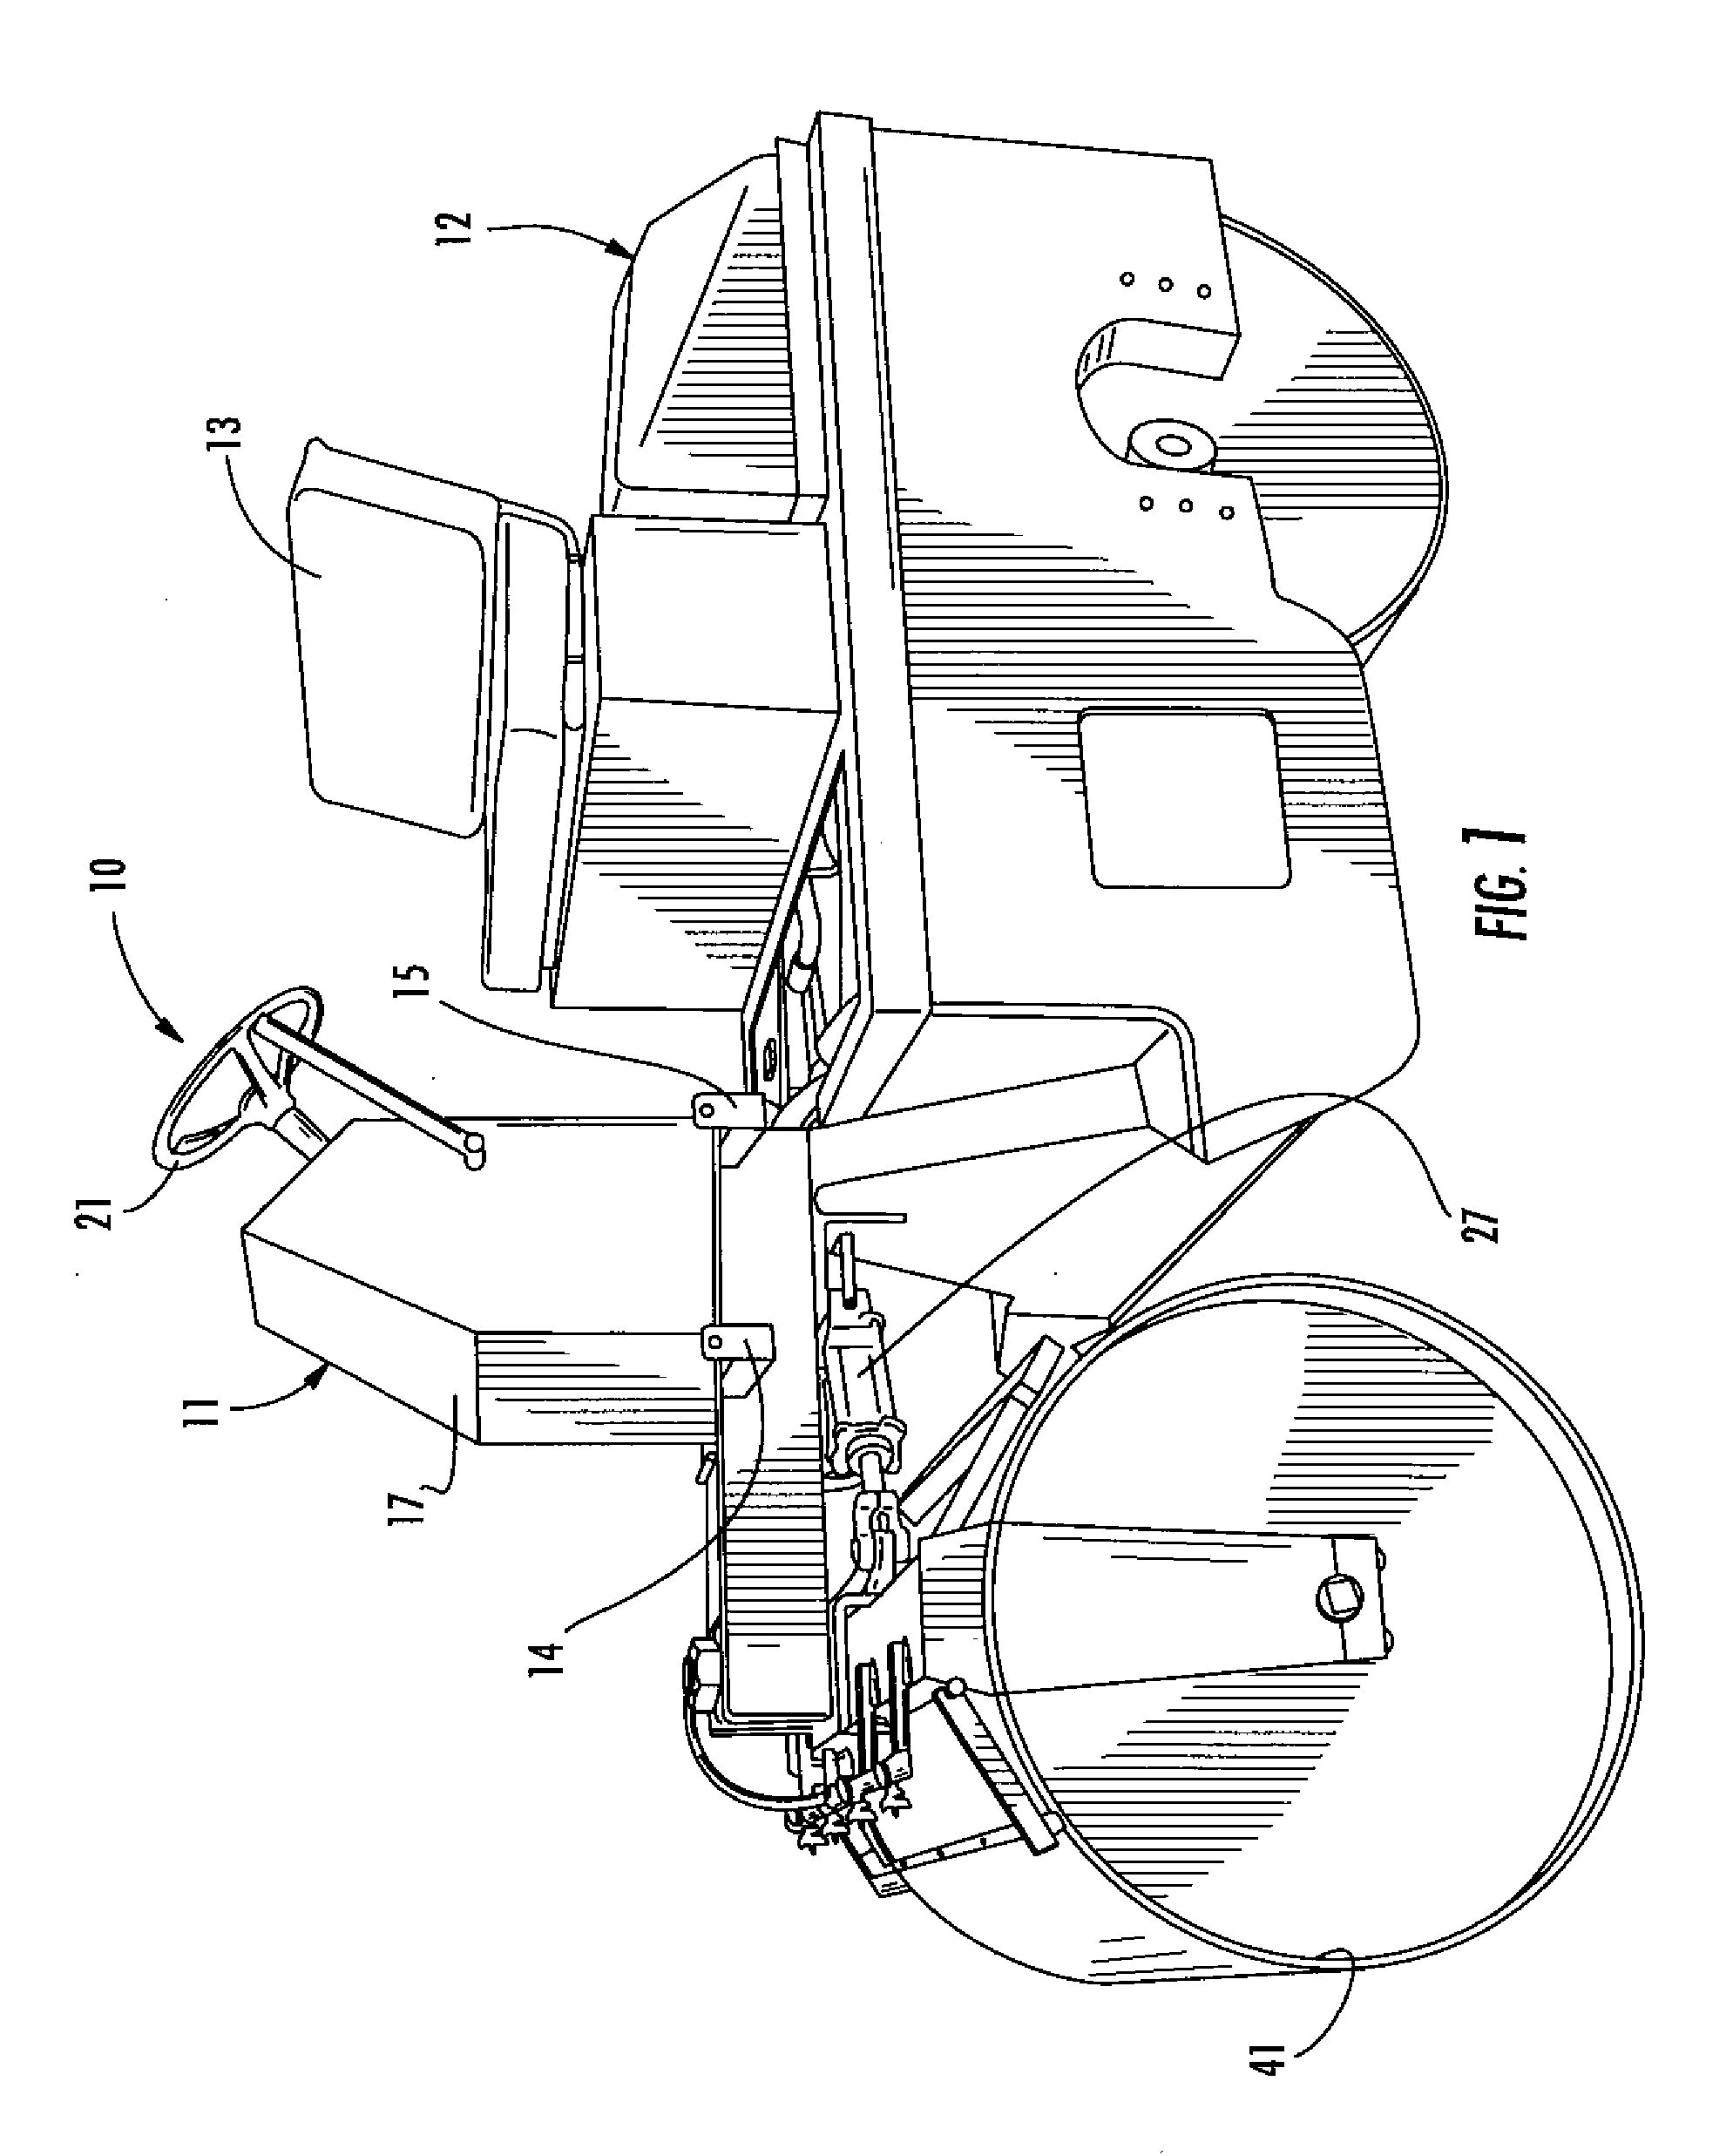 Control apparatus for a vehicle